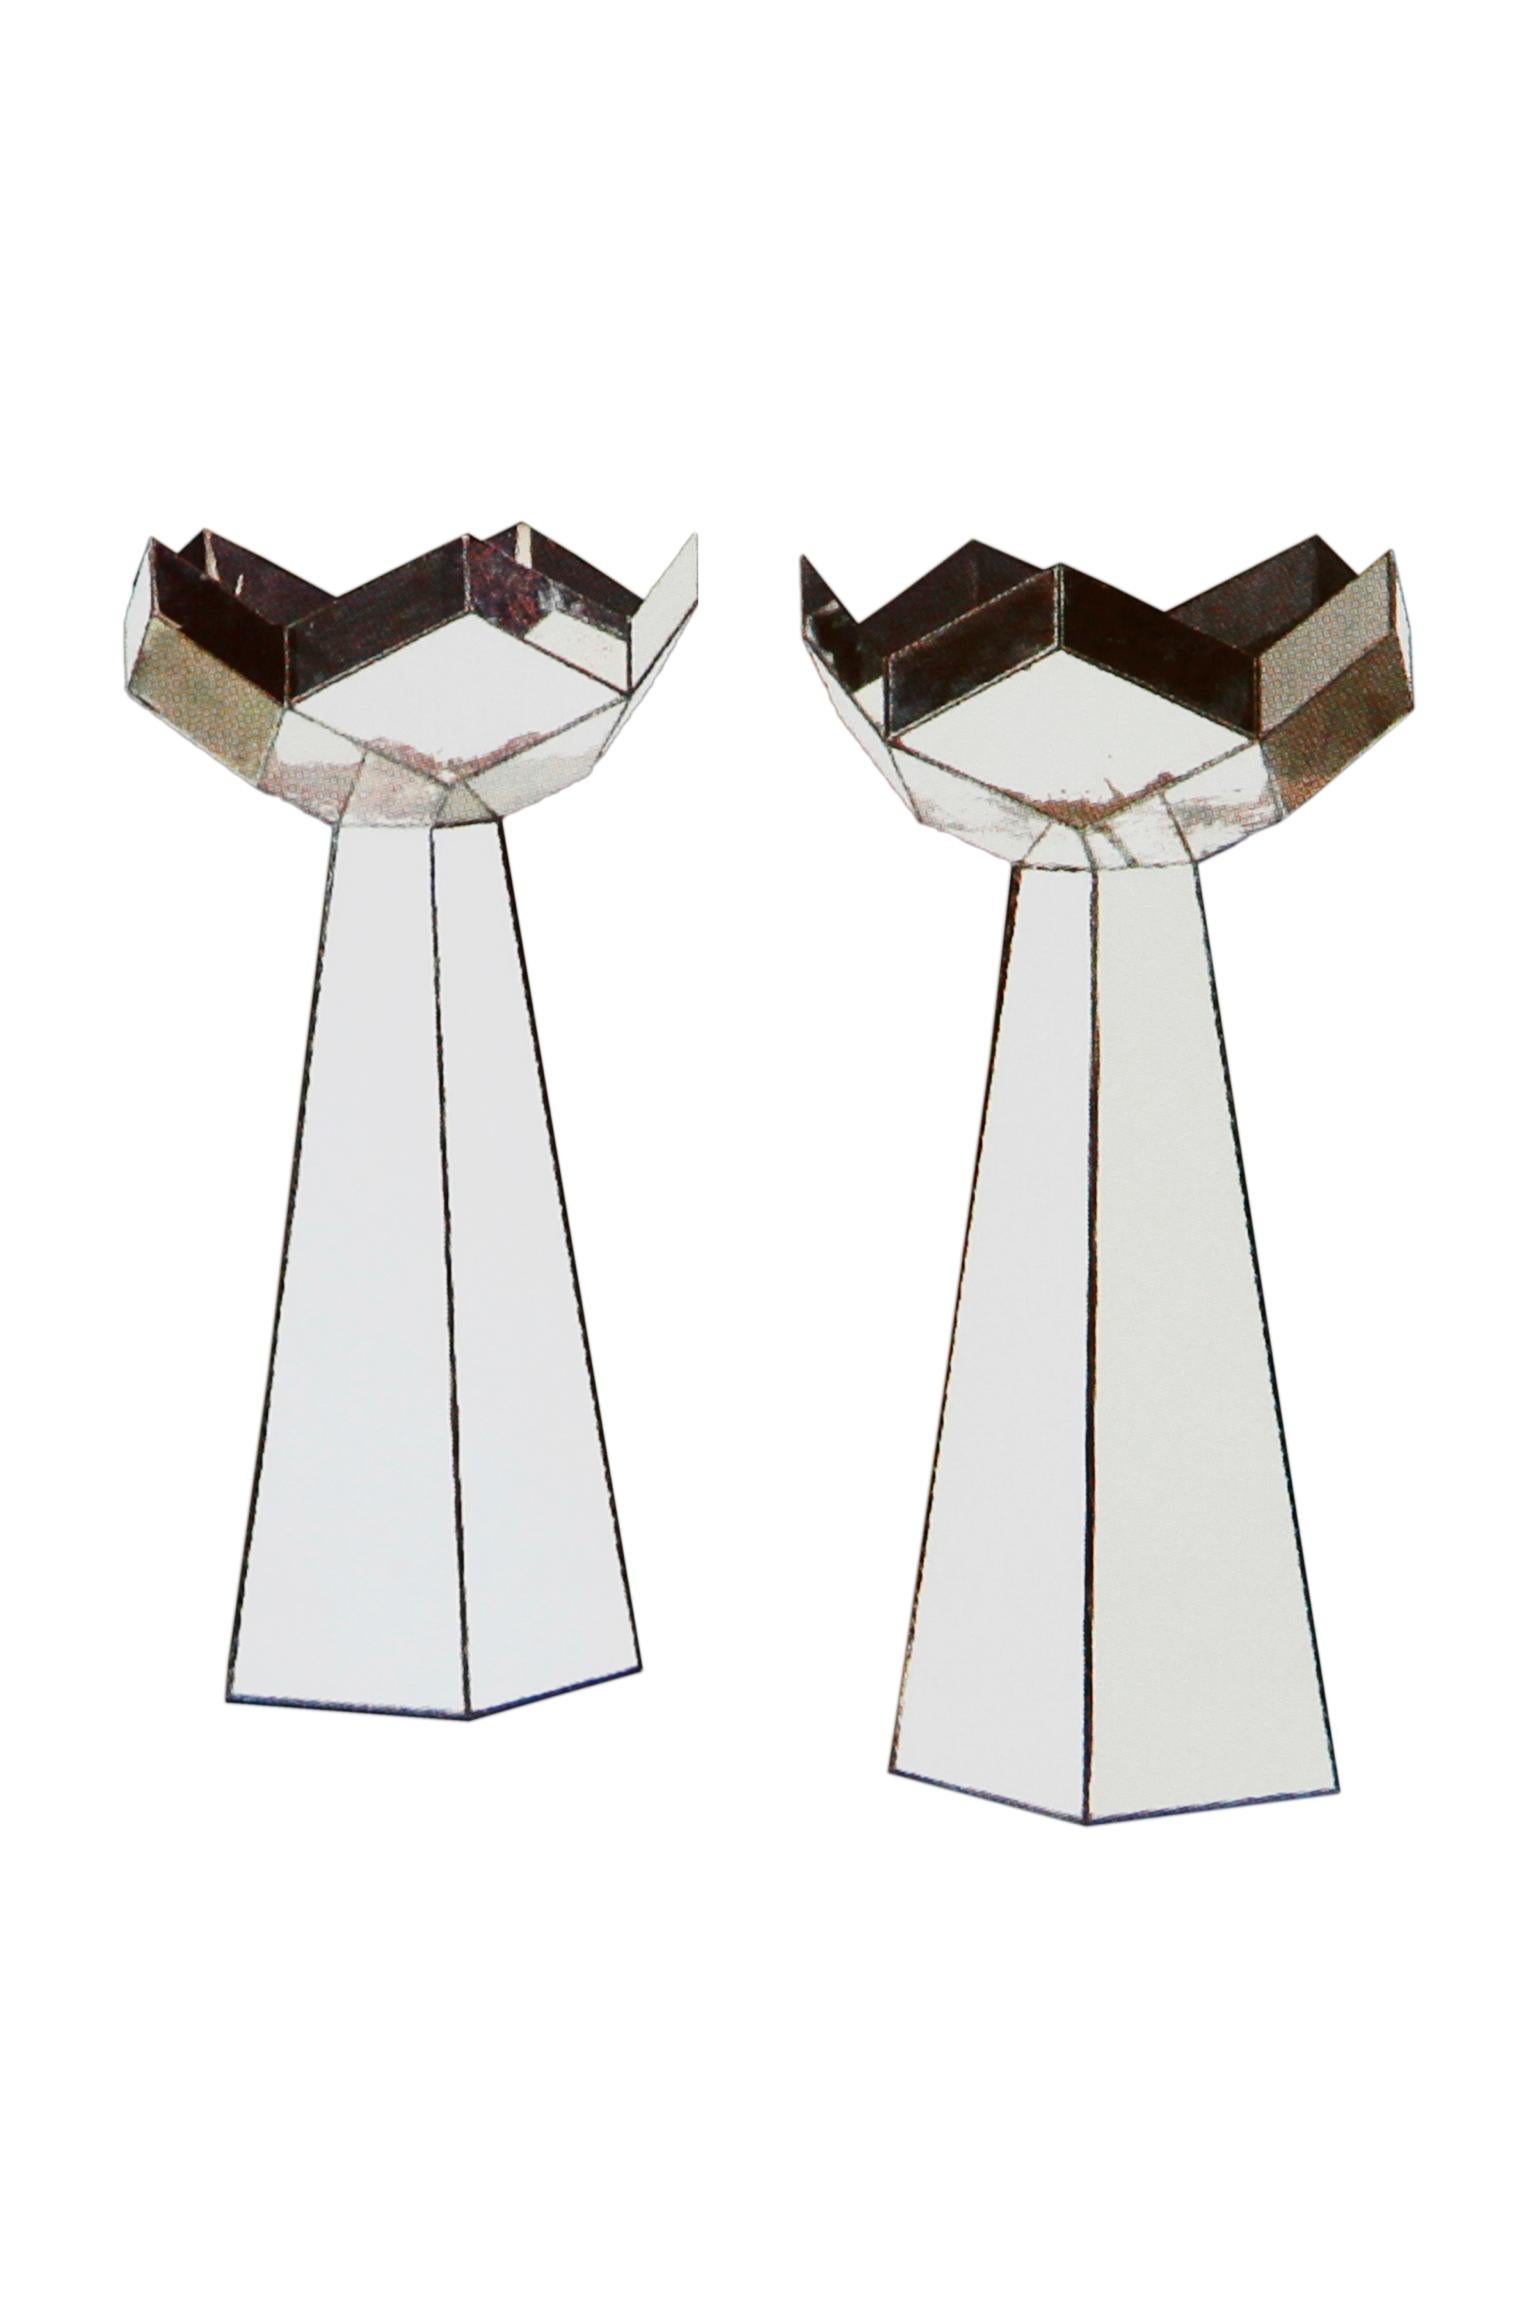 A pair of early 20th century French mirrored ornaments or bases. The five-panel column above a facetted pentagonal base.